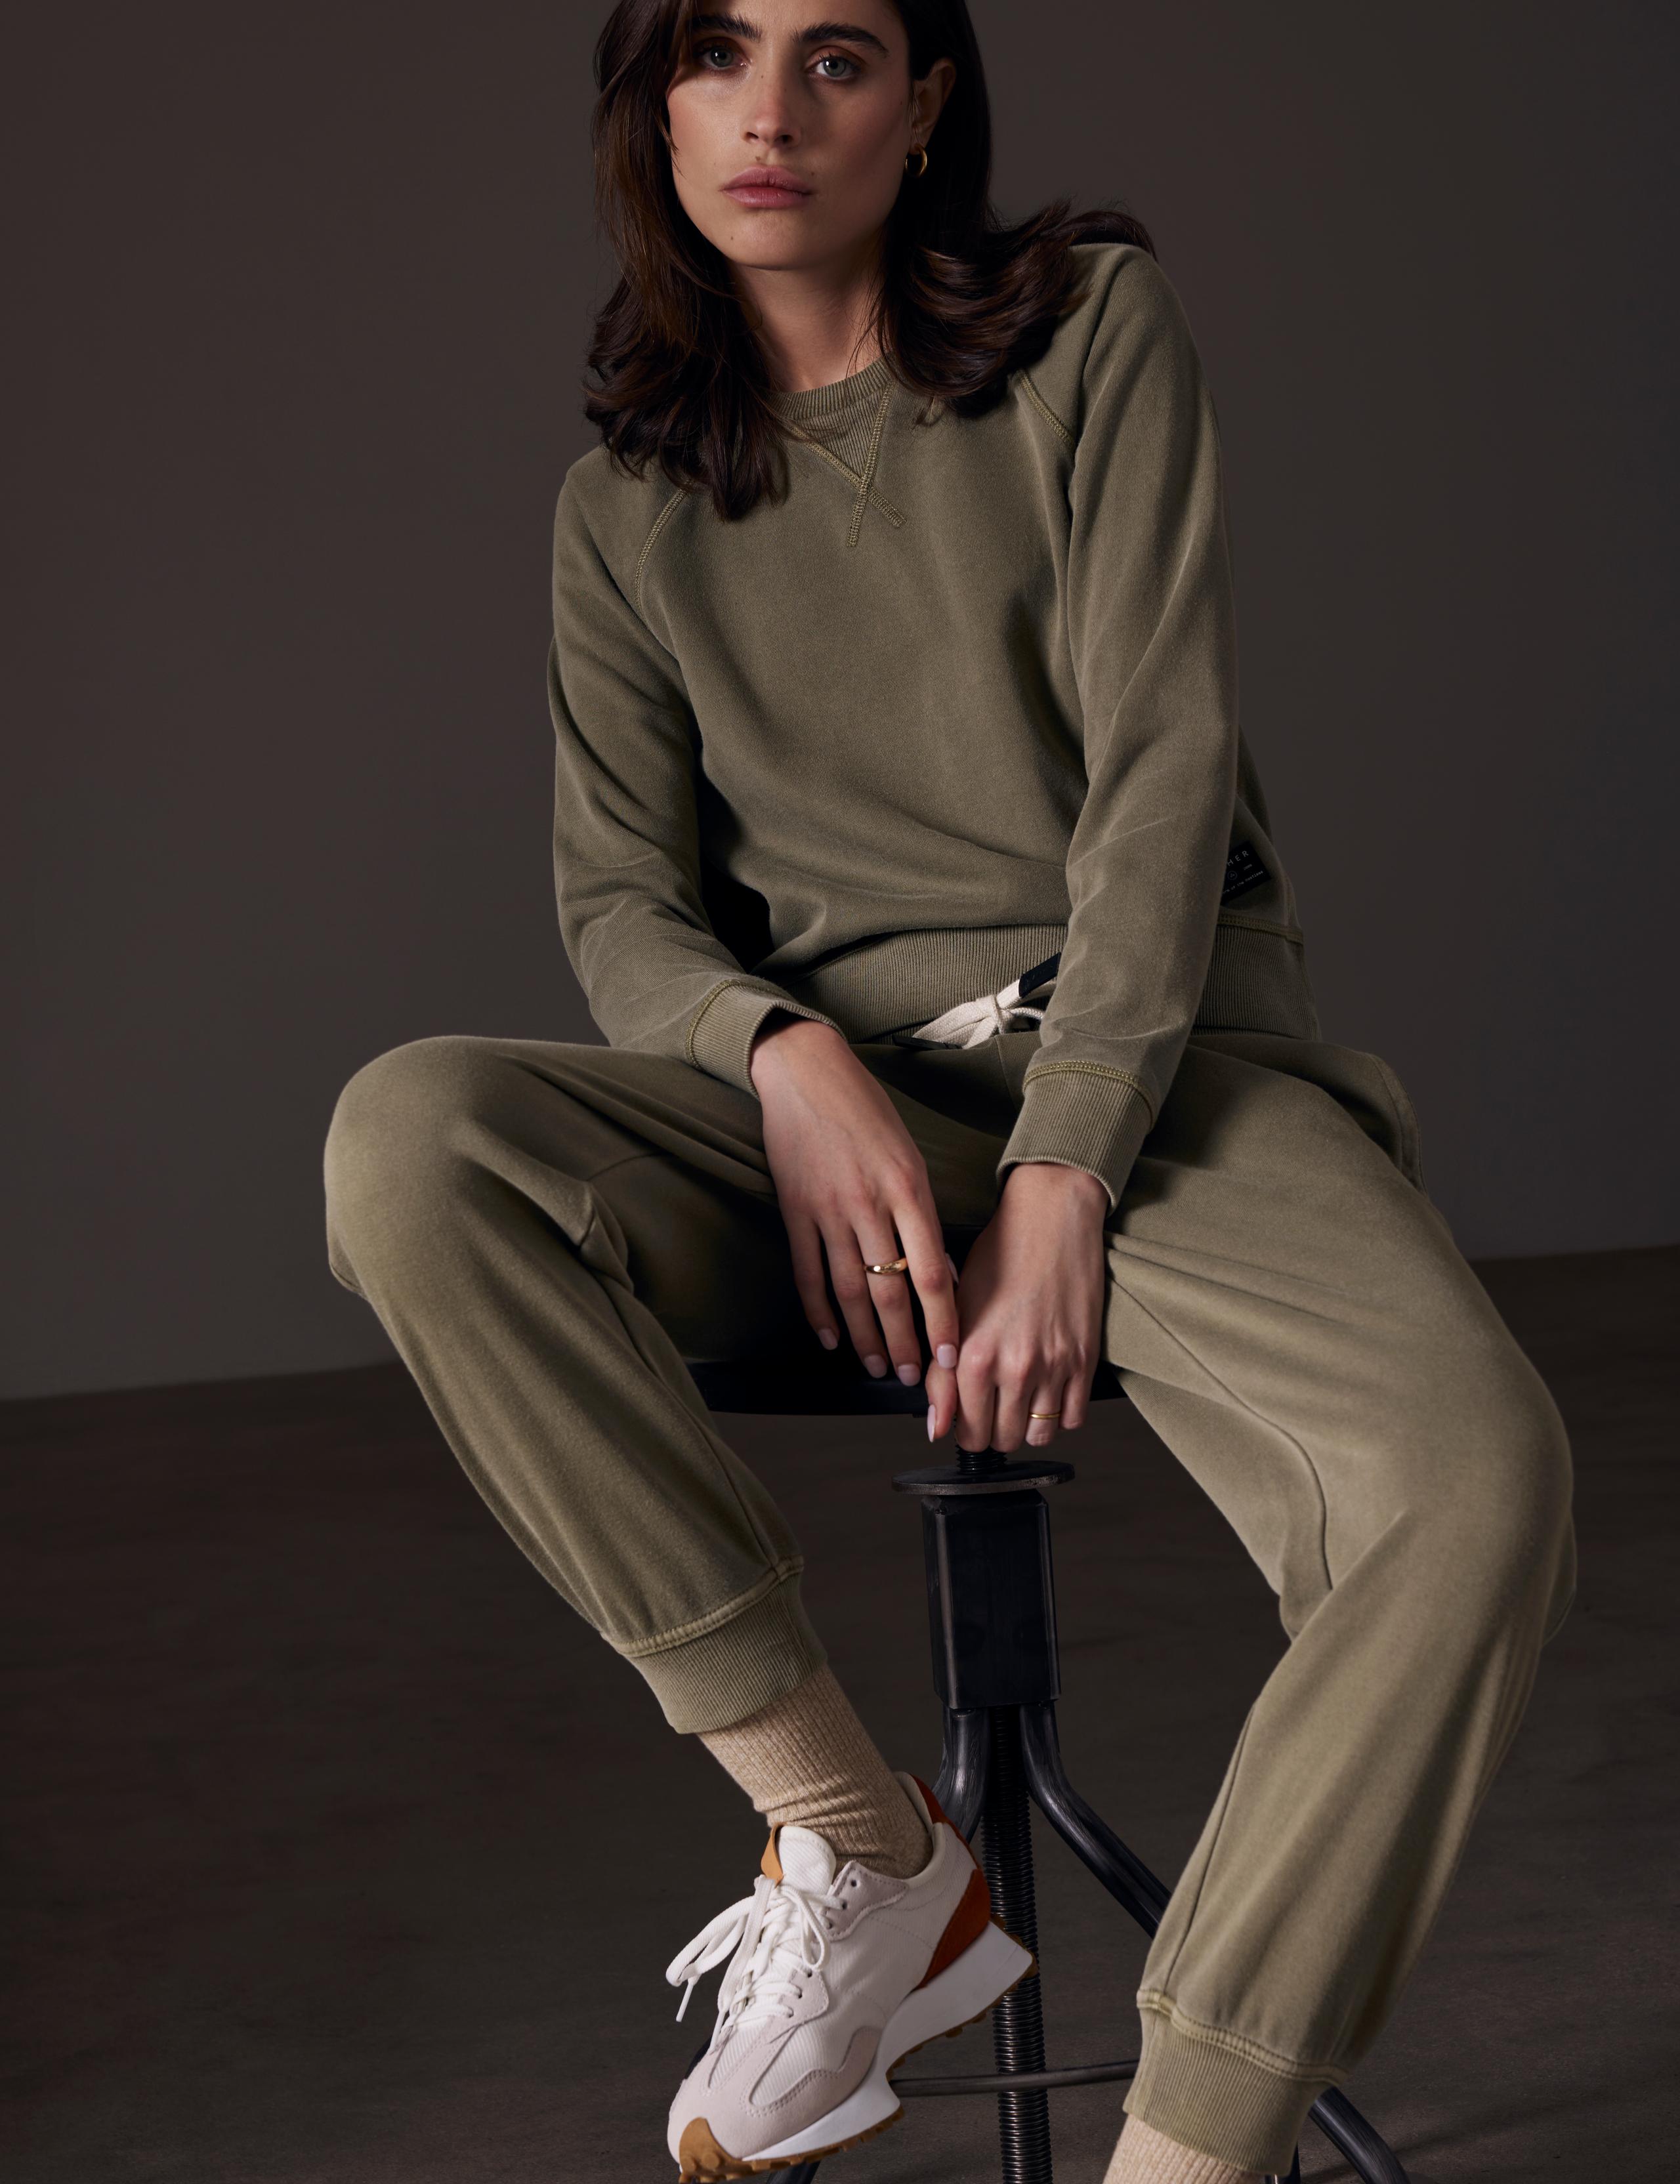 Woman sitting on stool in Solstice sweatshirt and jogger